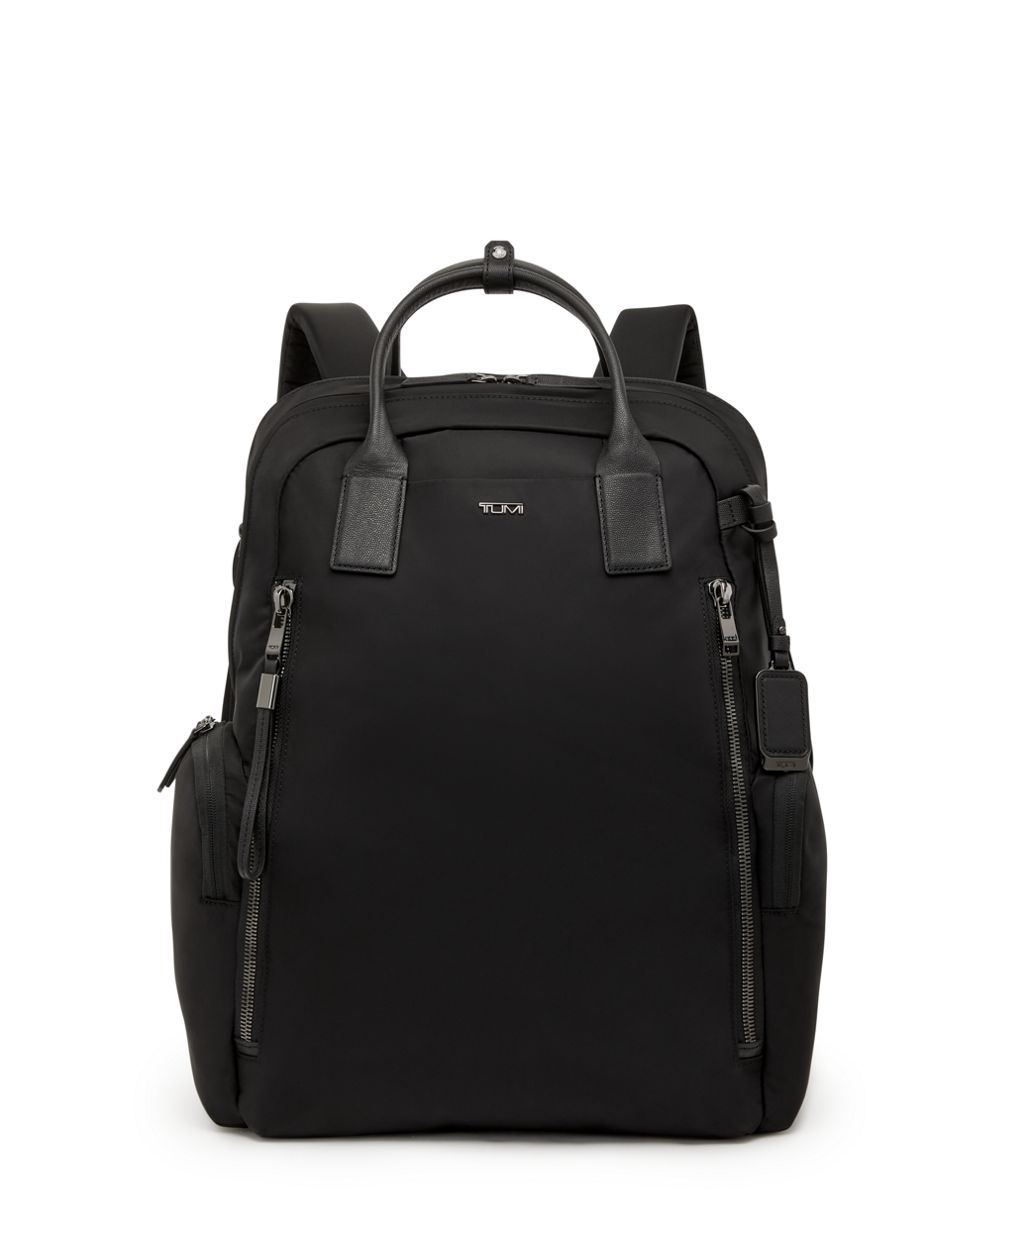 Tumi womens backpack: Combining Style and Functionality插图4